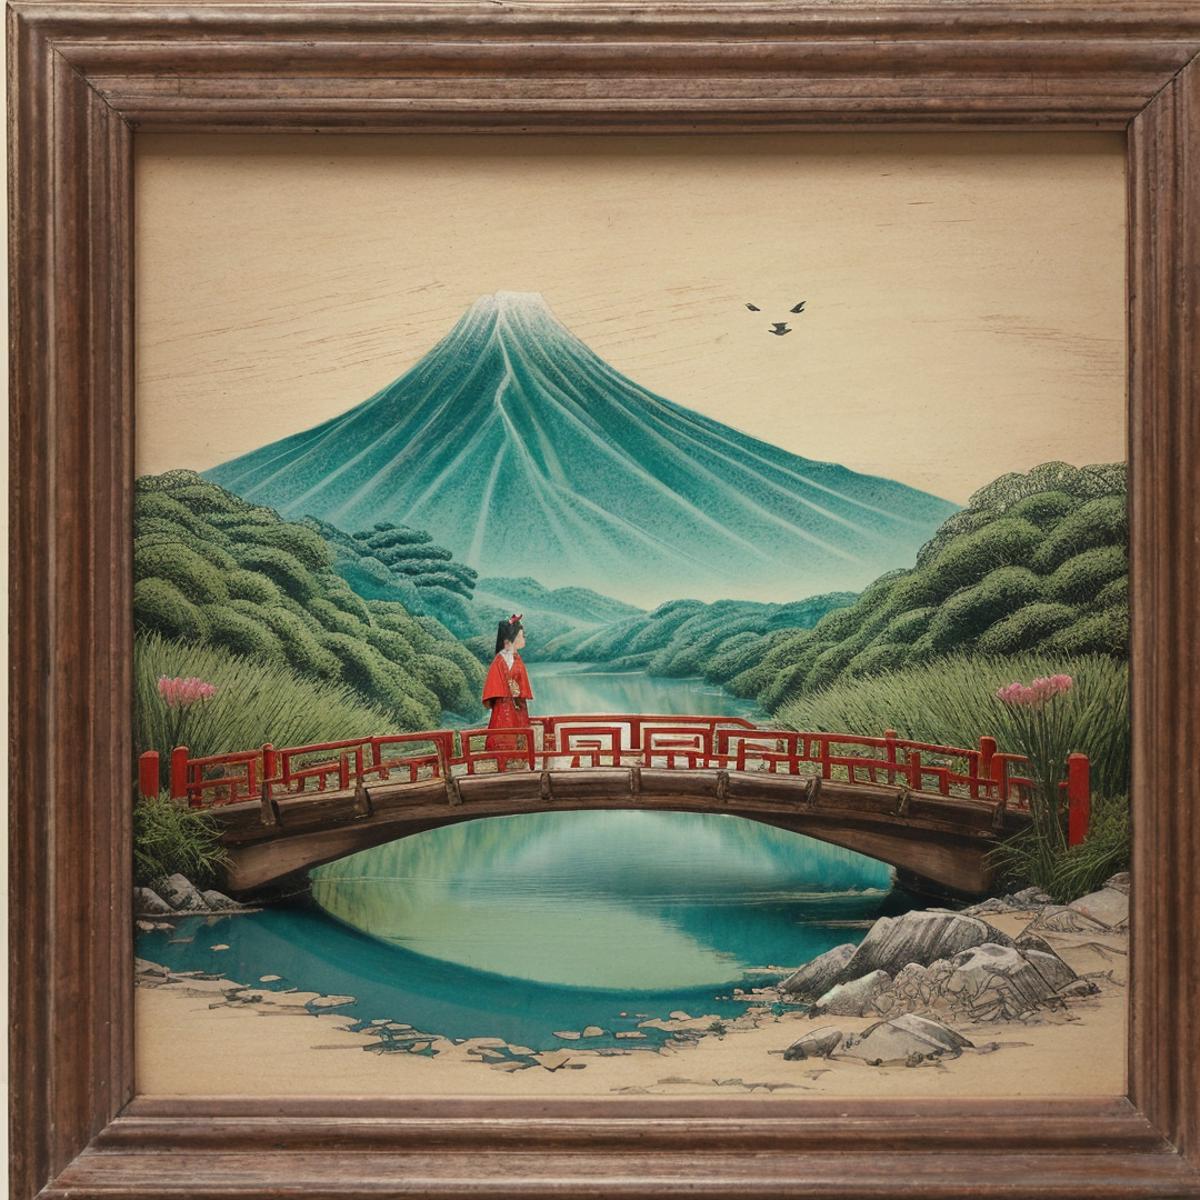 A painting of a woman standing on a bridge with a mountain in the background.